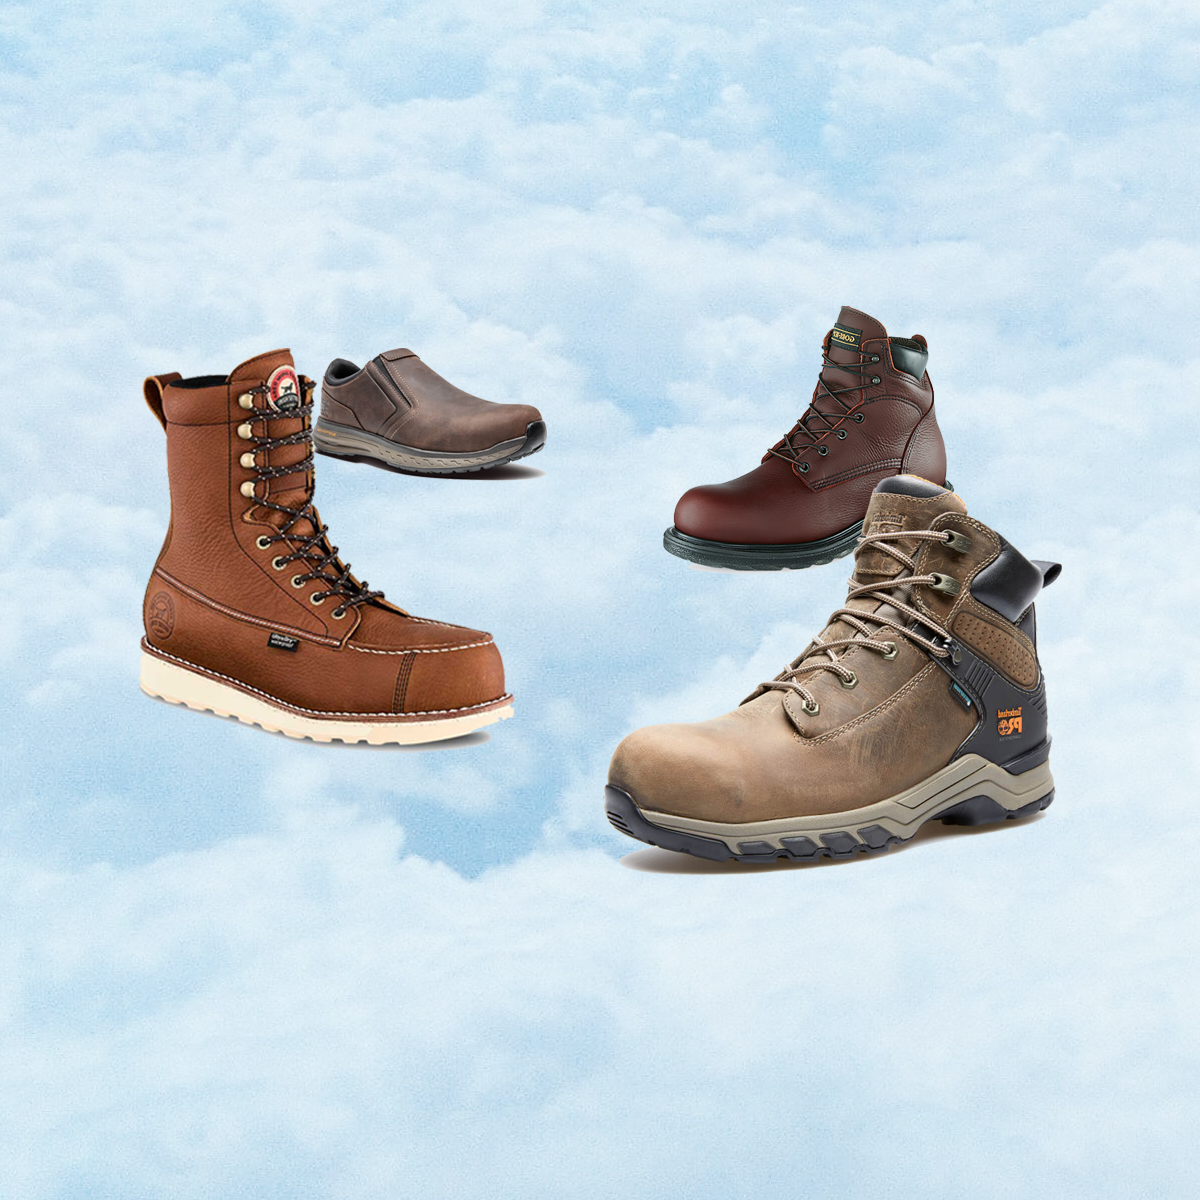 What Are the Most Comfortable Work Boots?